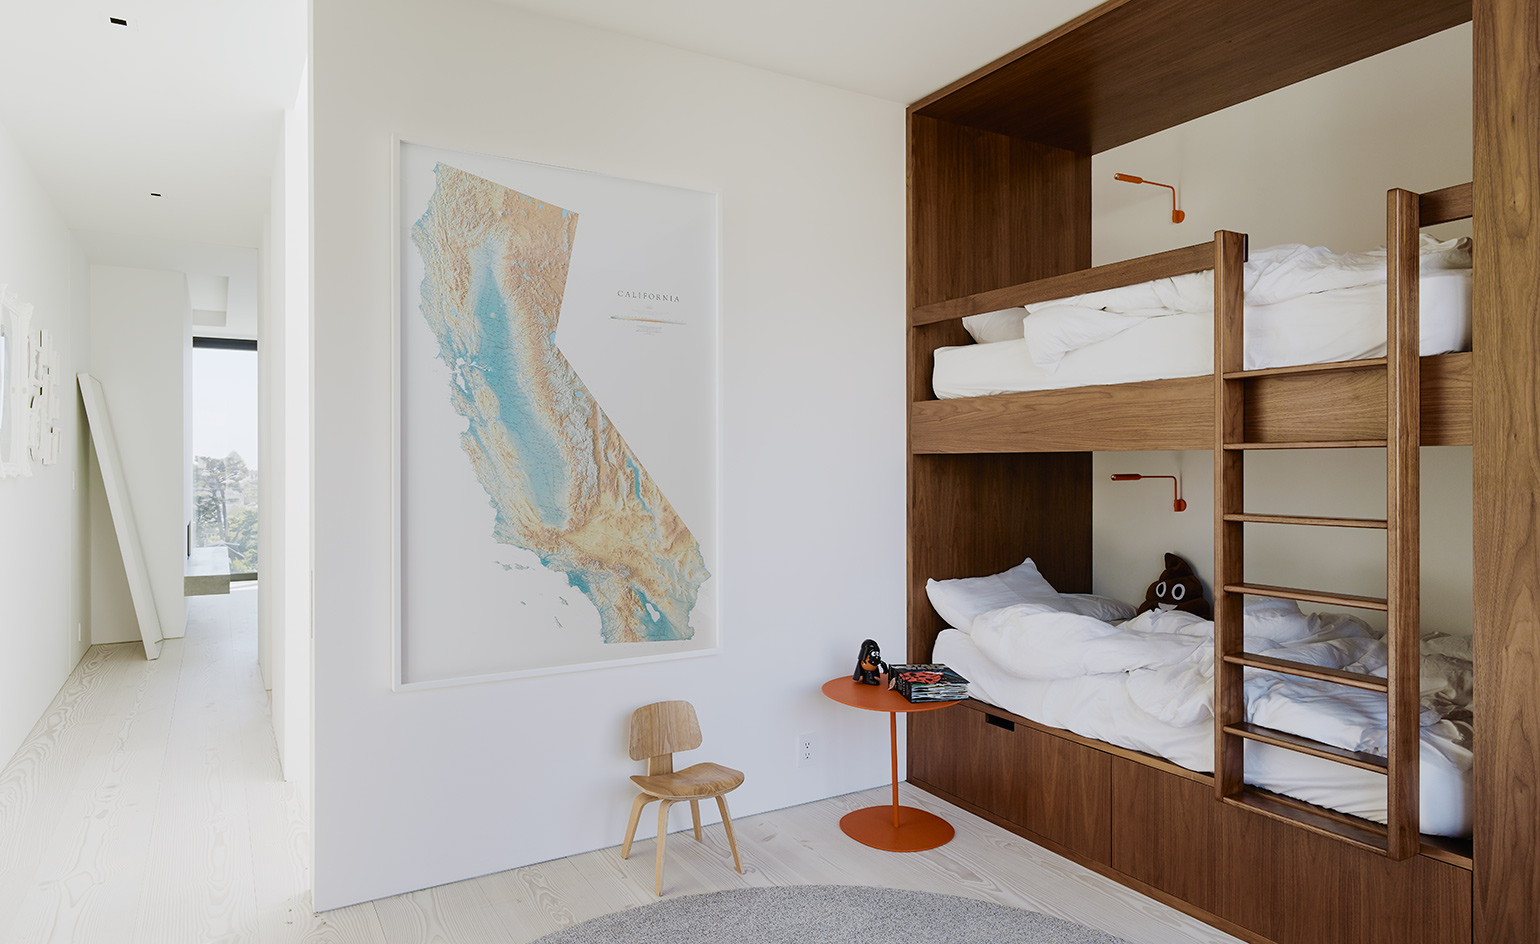 The kids' bedroom has a wooden bunk bed, a map on the wall and some small accessories